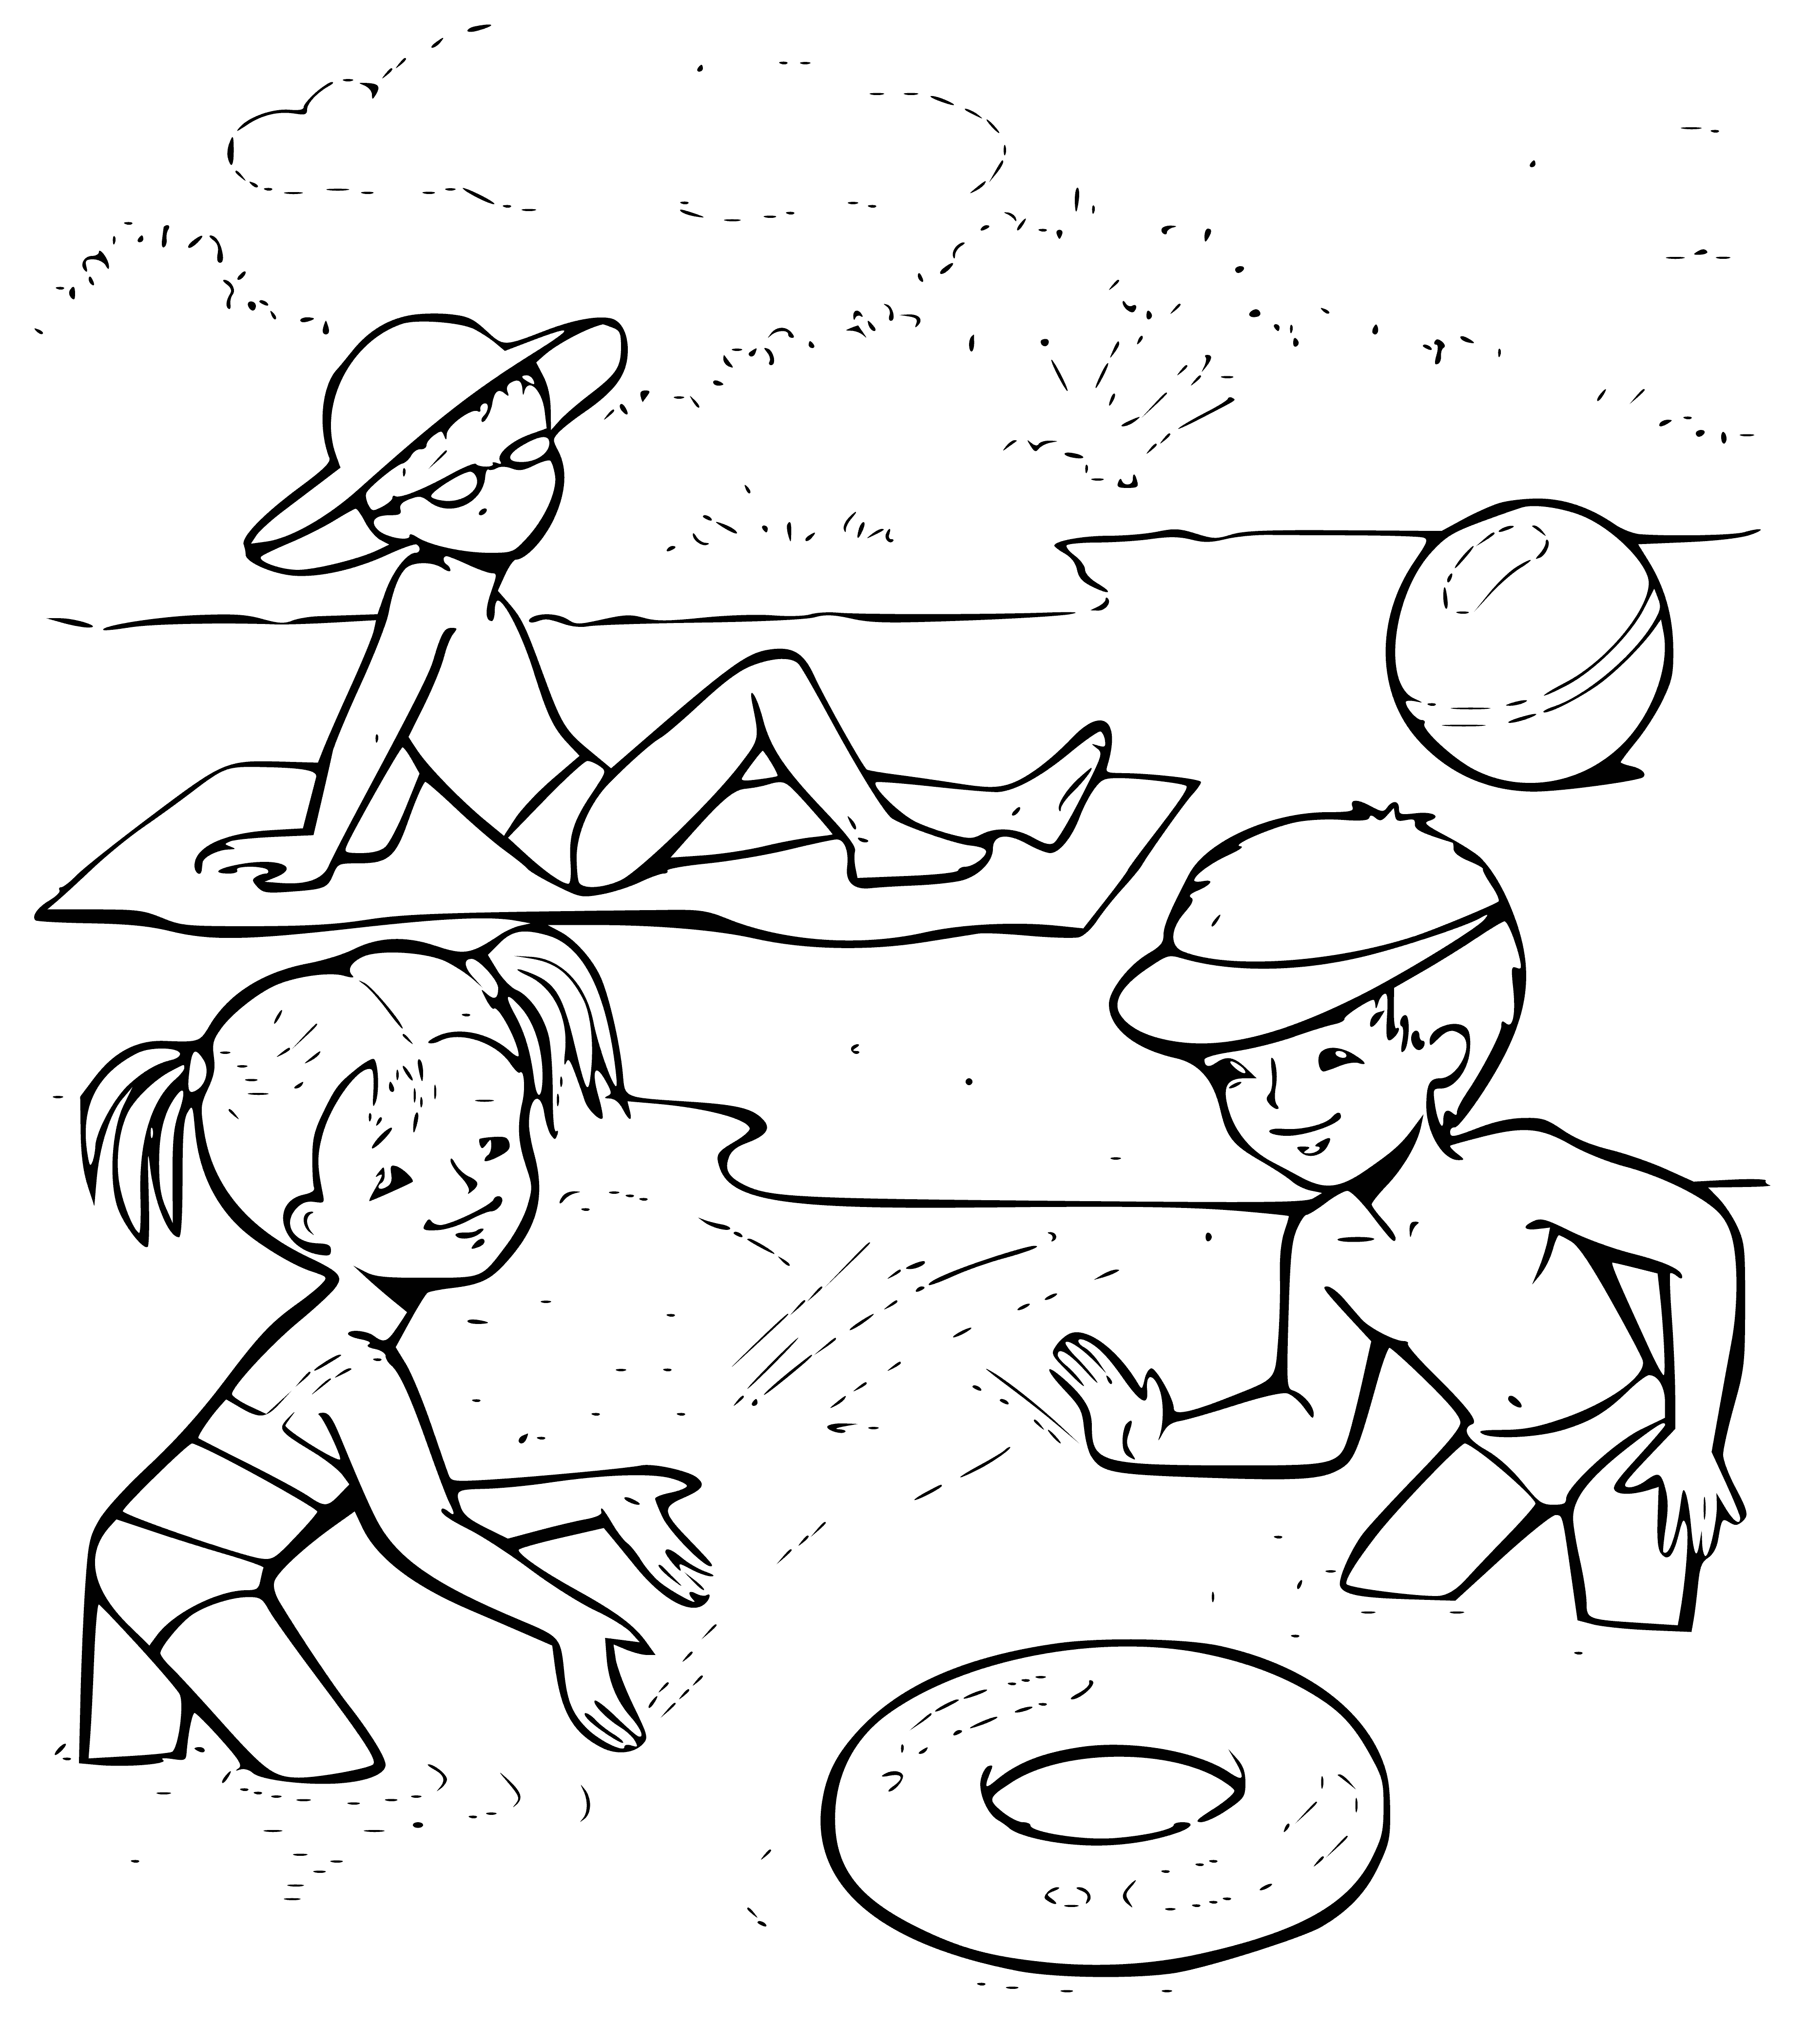 coloring page: Kids play by river on summer day, splashing in water & sitting on rocks; trees & mountains in distance.